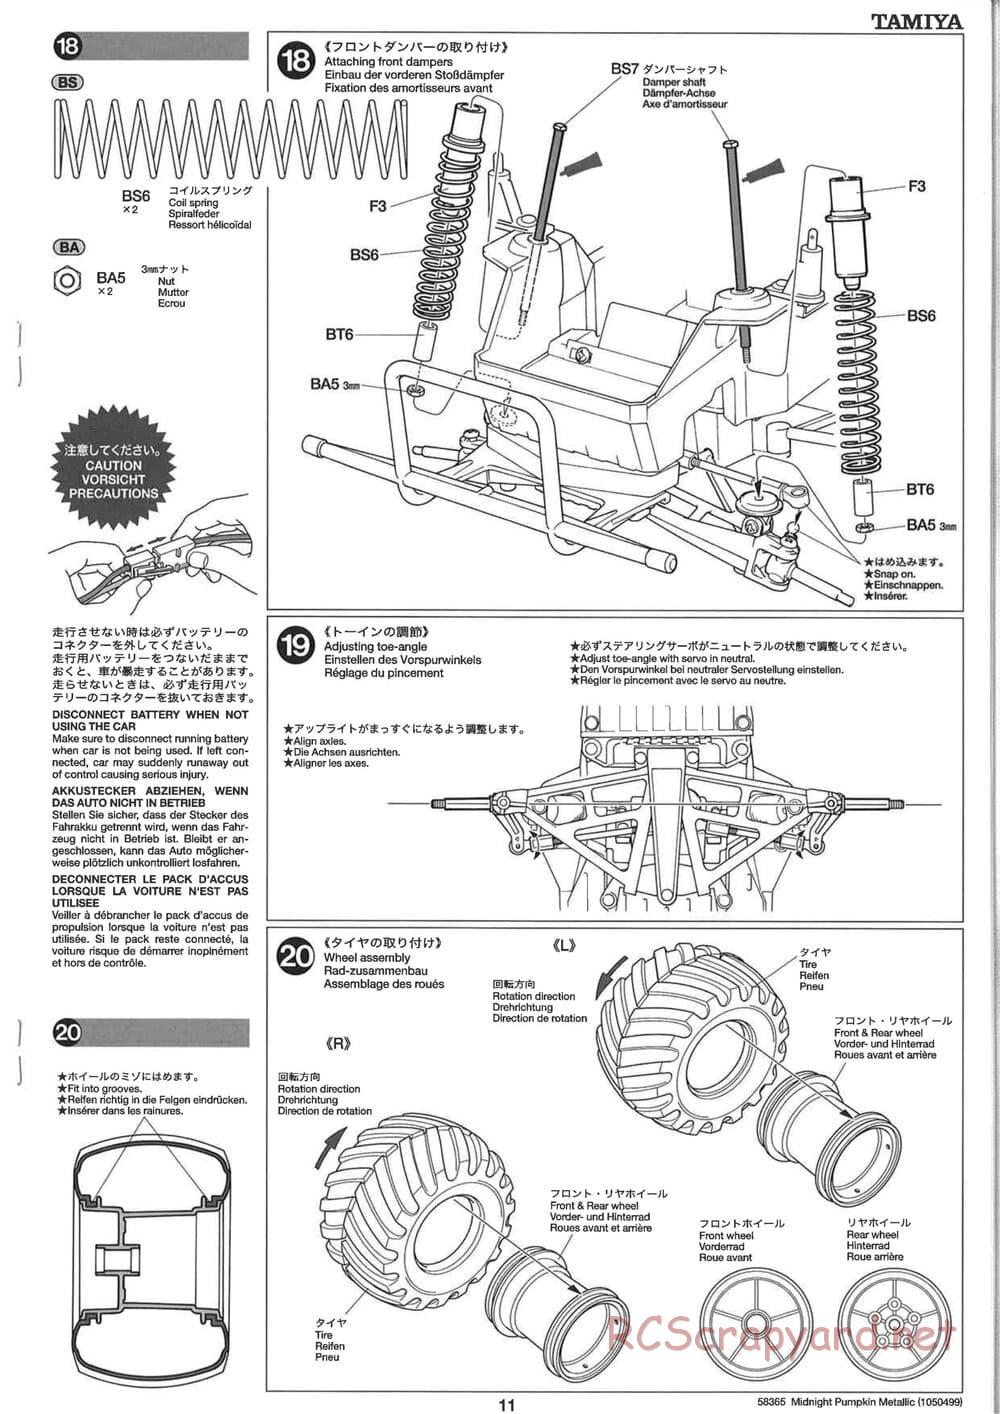 Tamiya - Midnight Pumpkin Chrome Metallic Special - CW-01 Chassis - Manual - Page 11